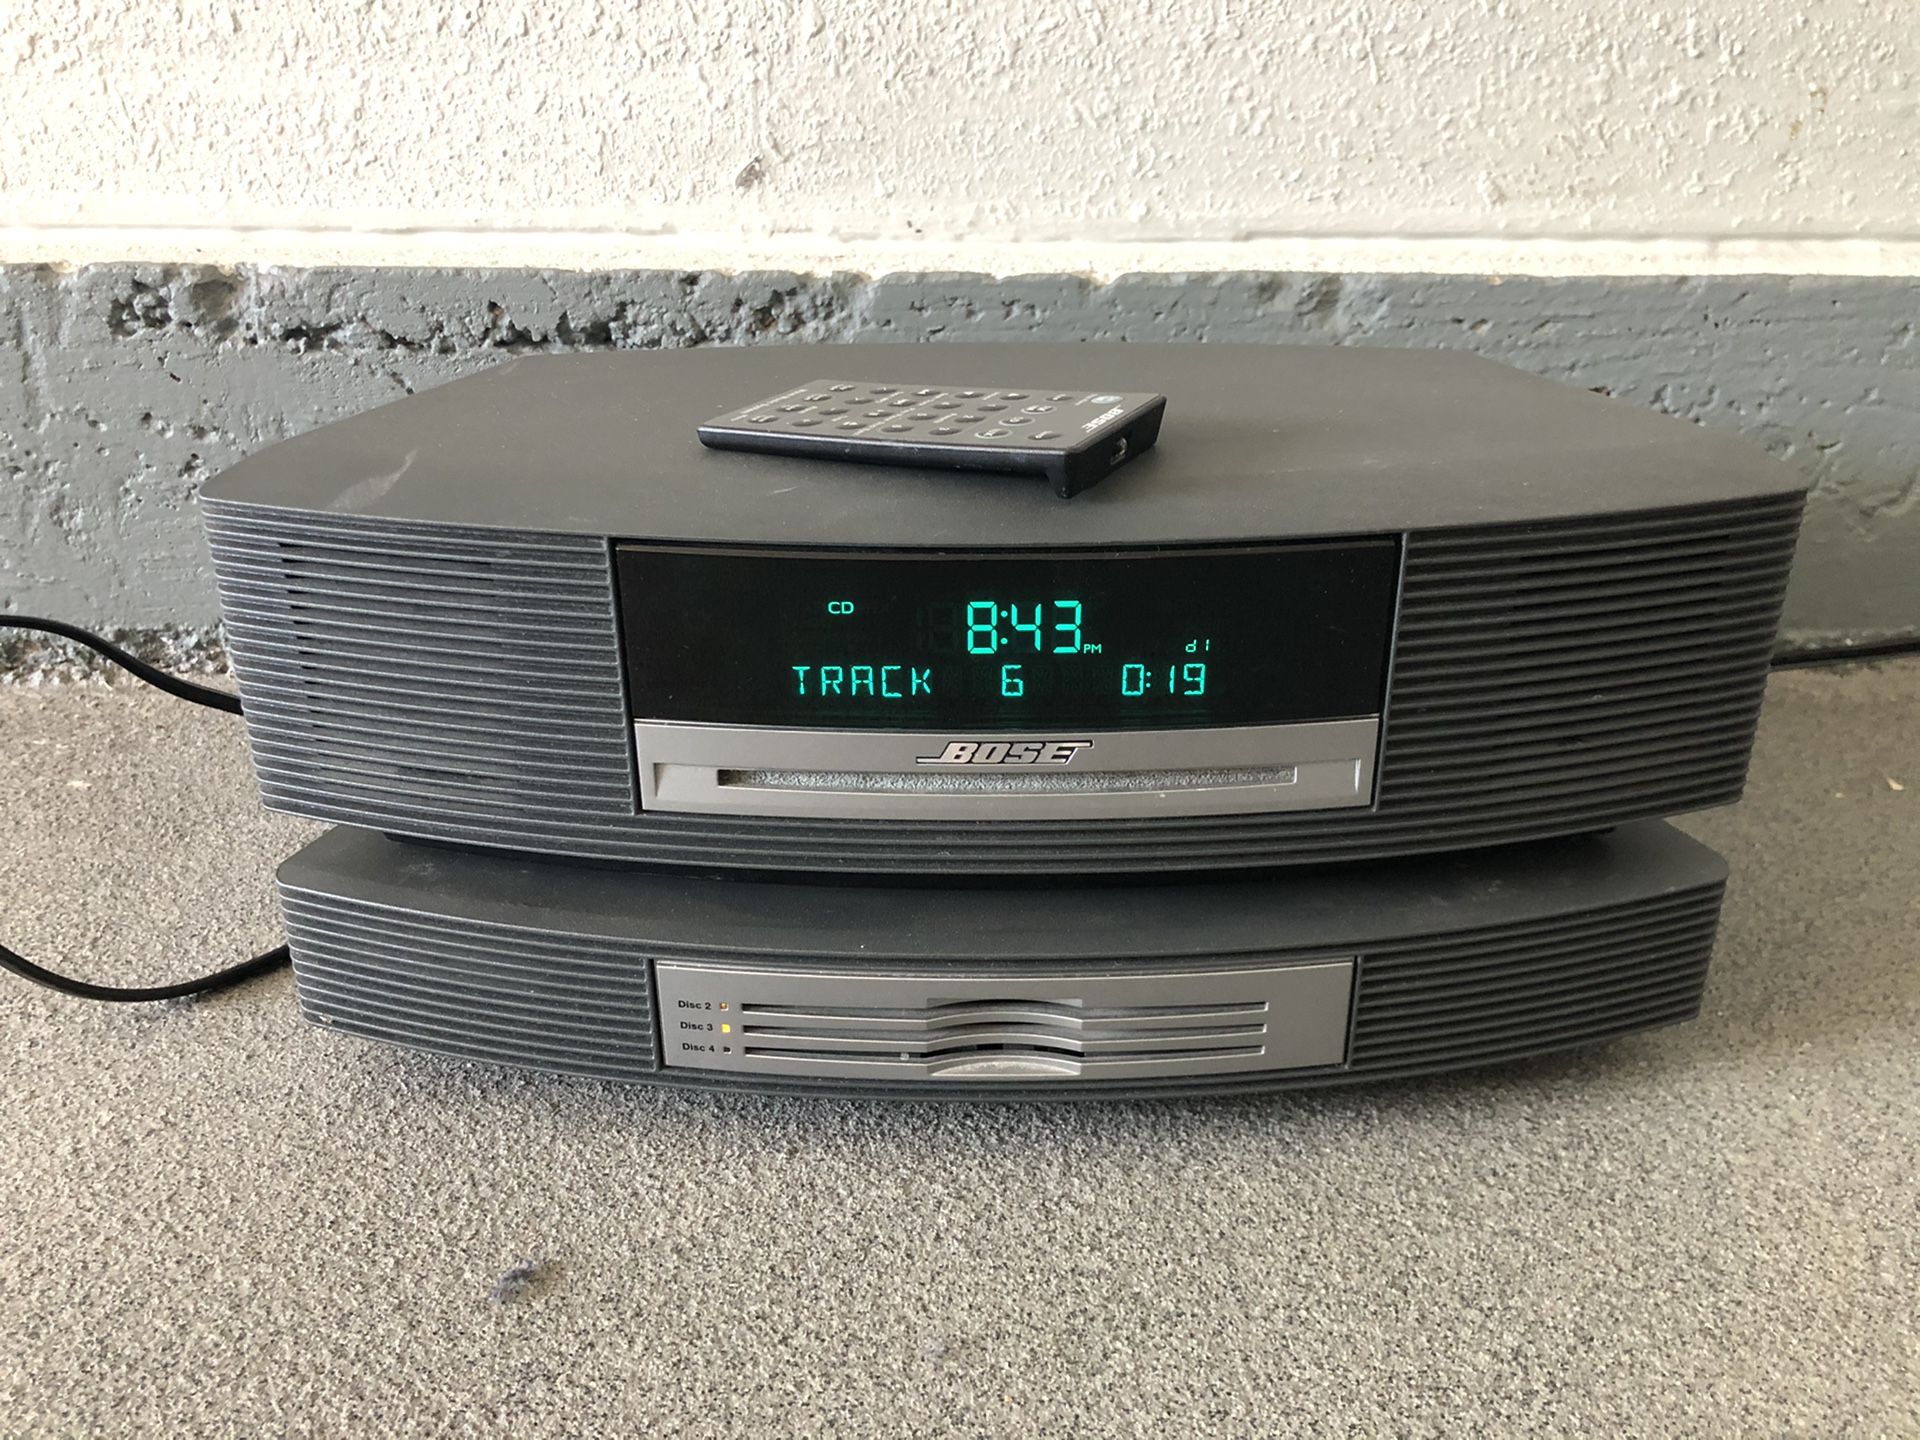 Bose wave CD player with cd changer and remote